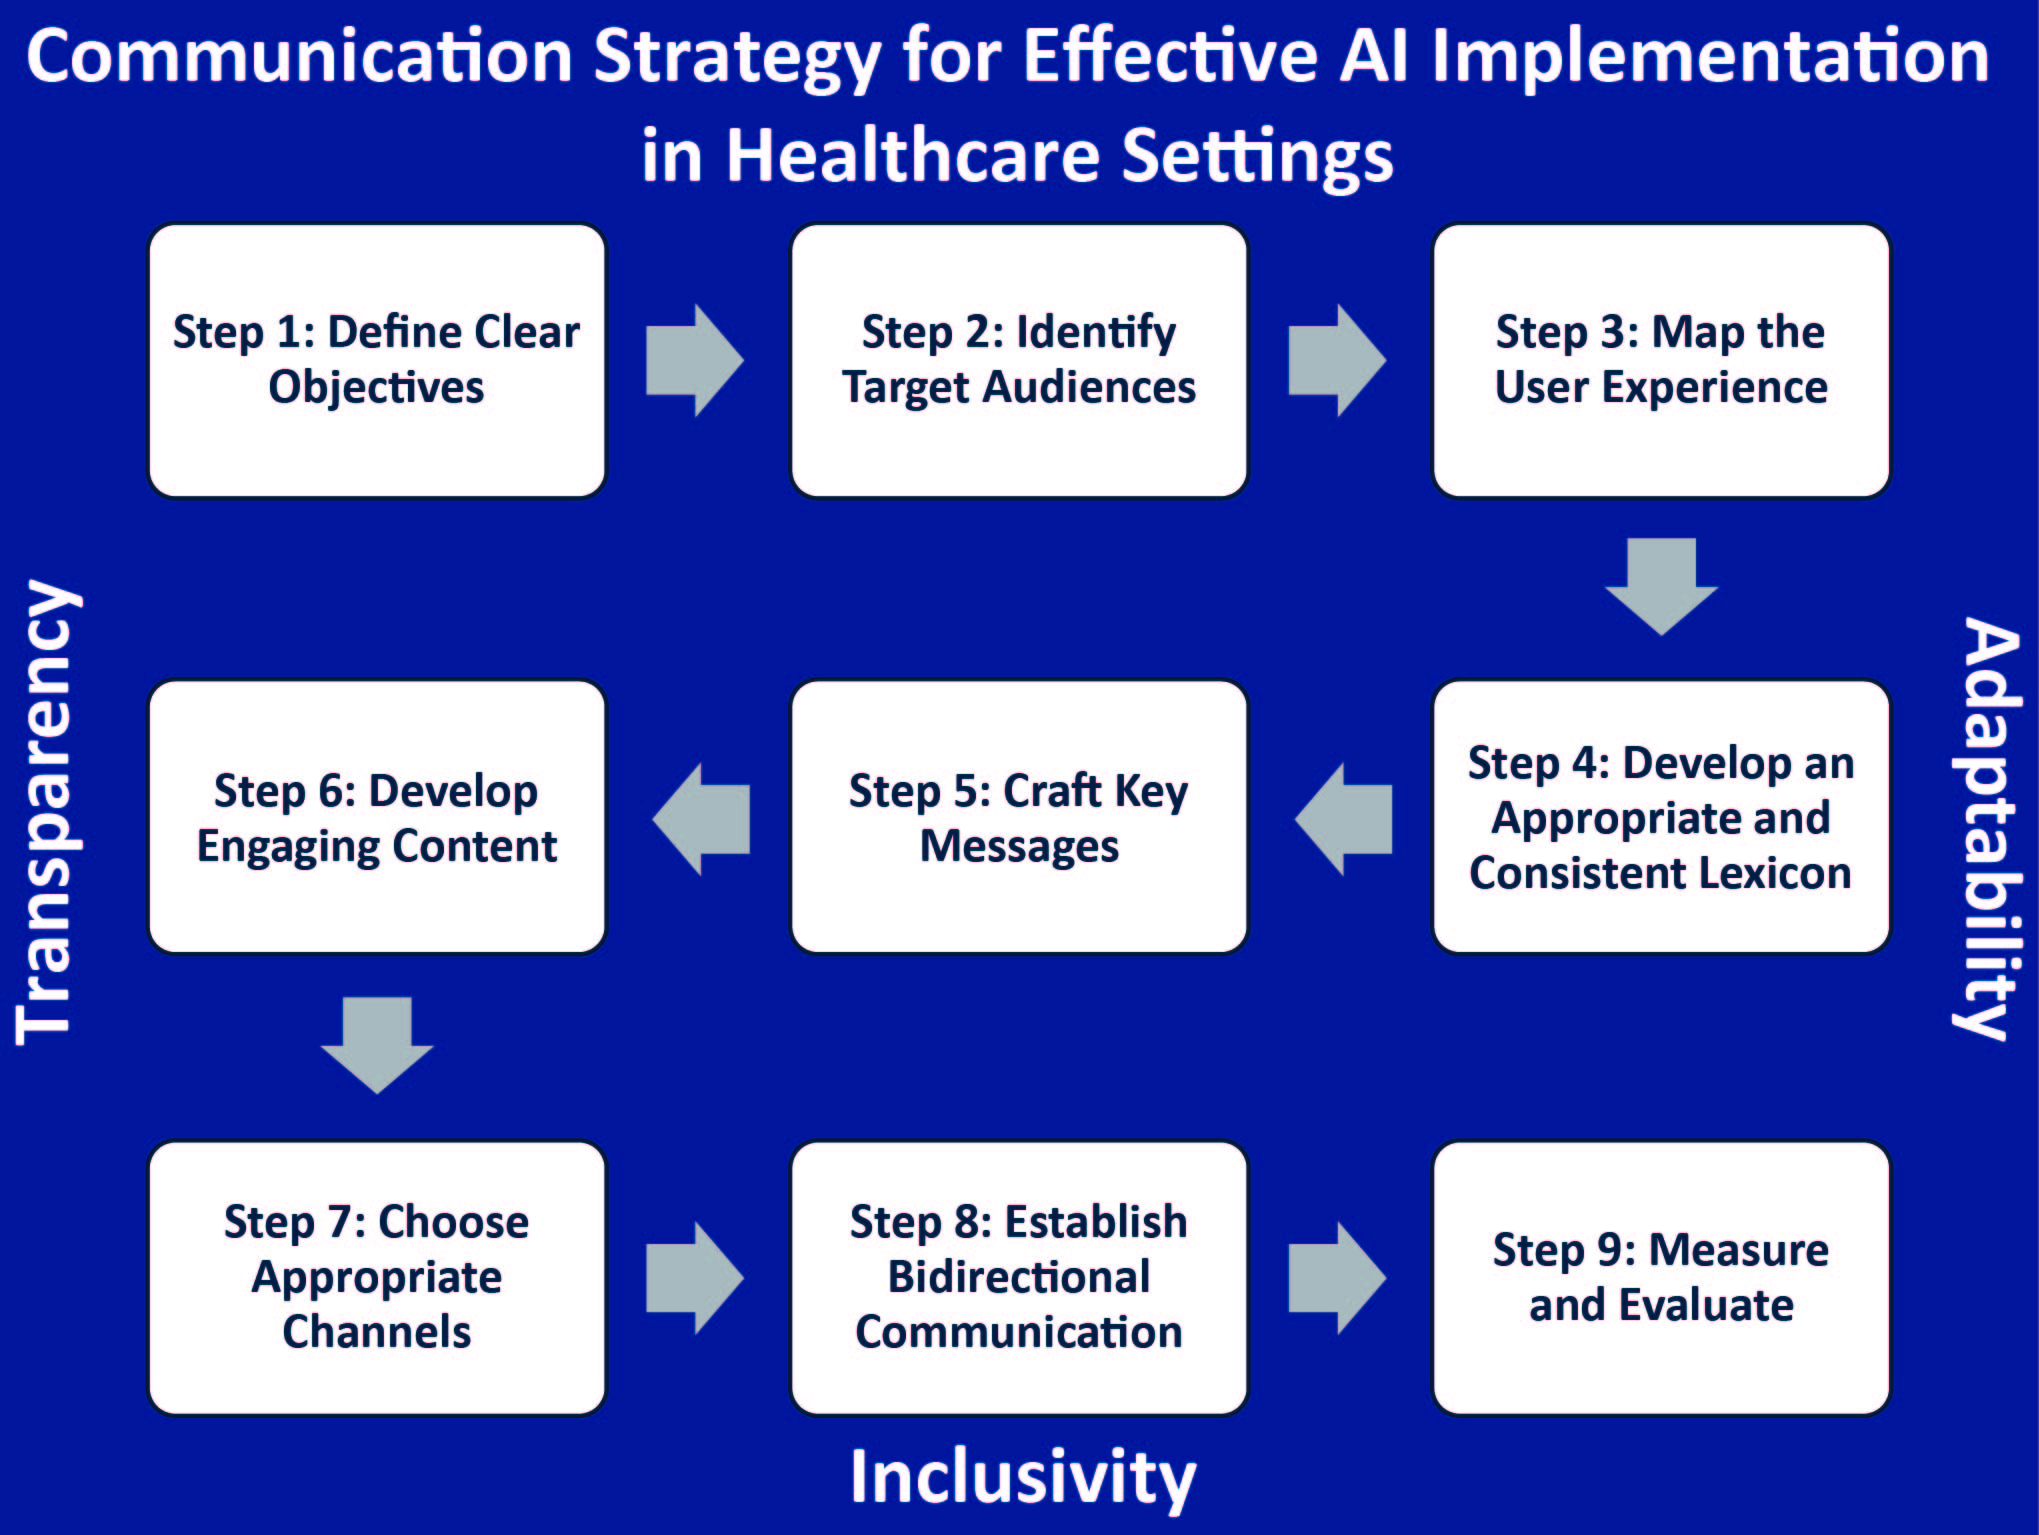 Communication Strategy for Effective Artificial Intelligence Implementation in Healthcare Settings.